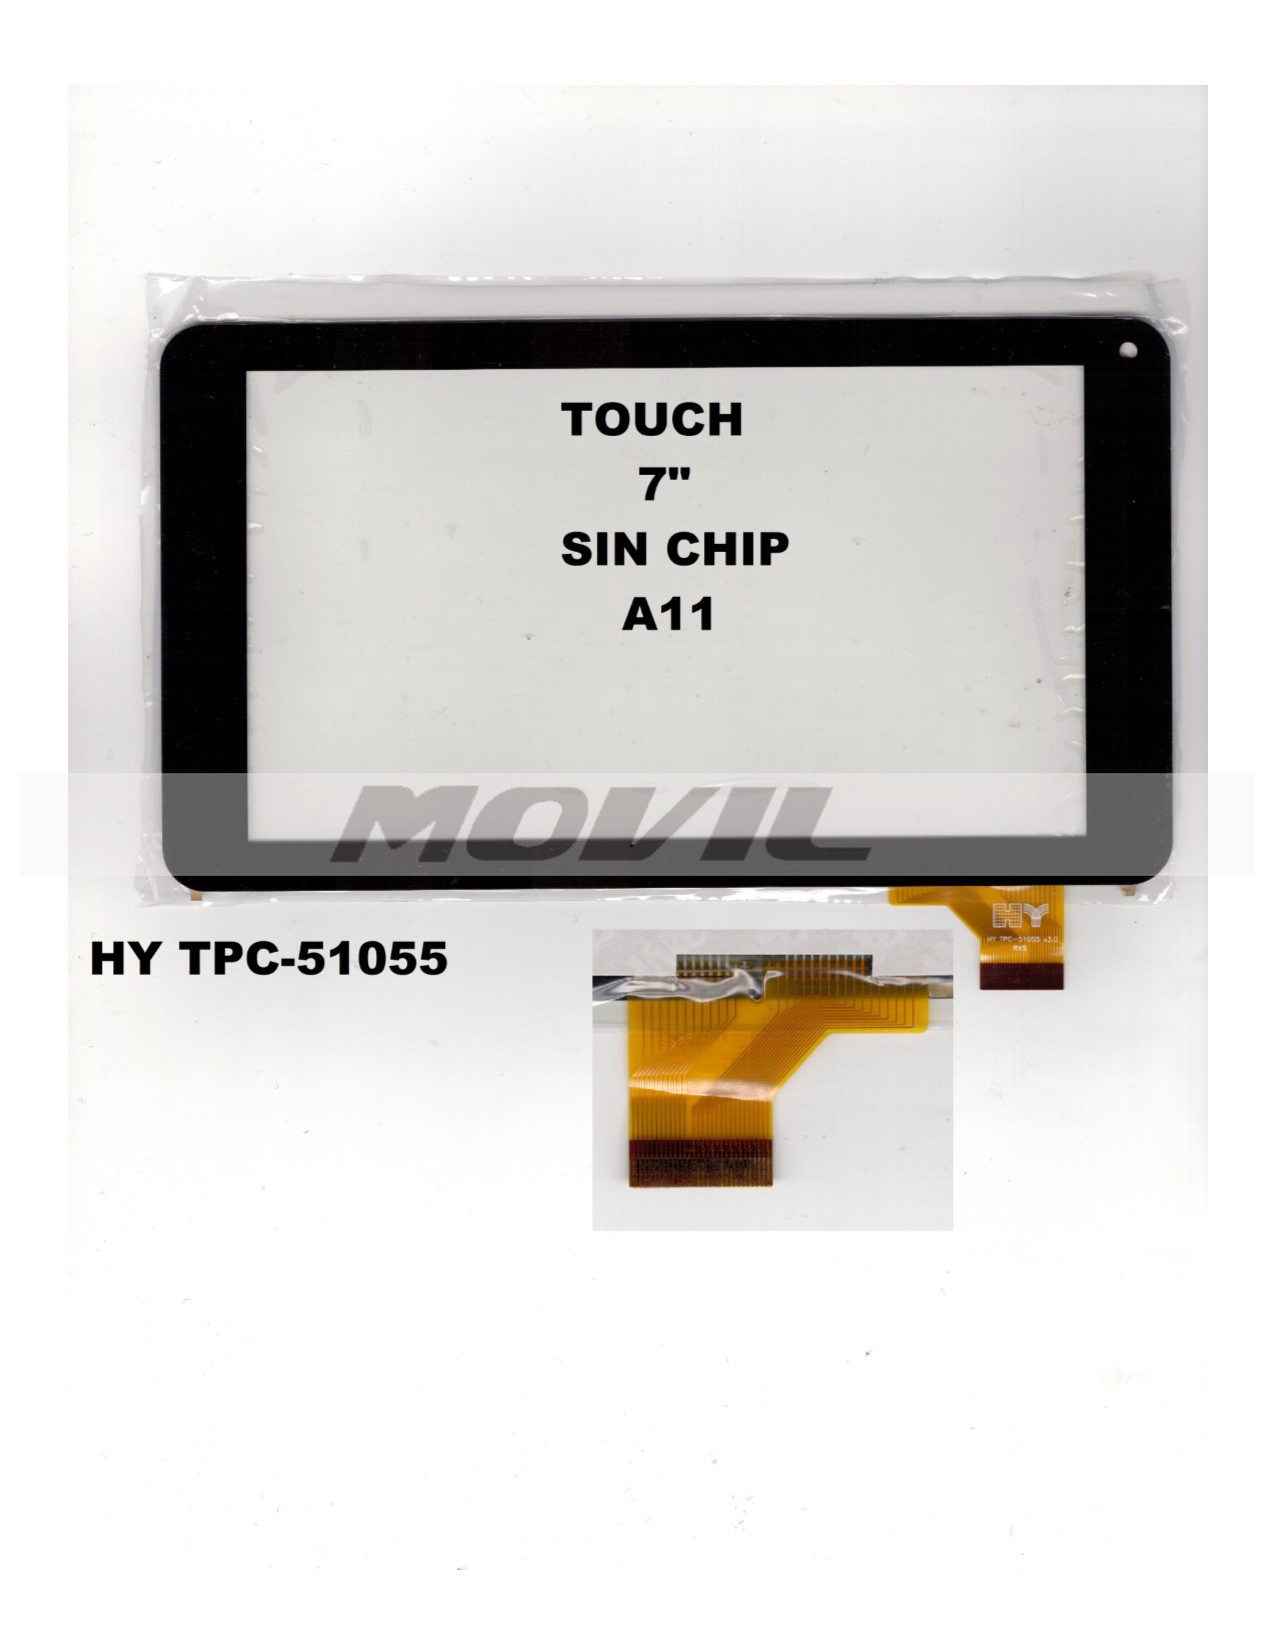 Touch tactil para tablet flex 7 inch SIN CHIP A11 HY TPC-51055